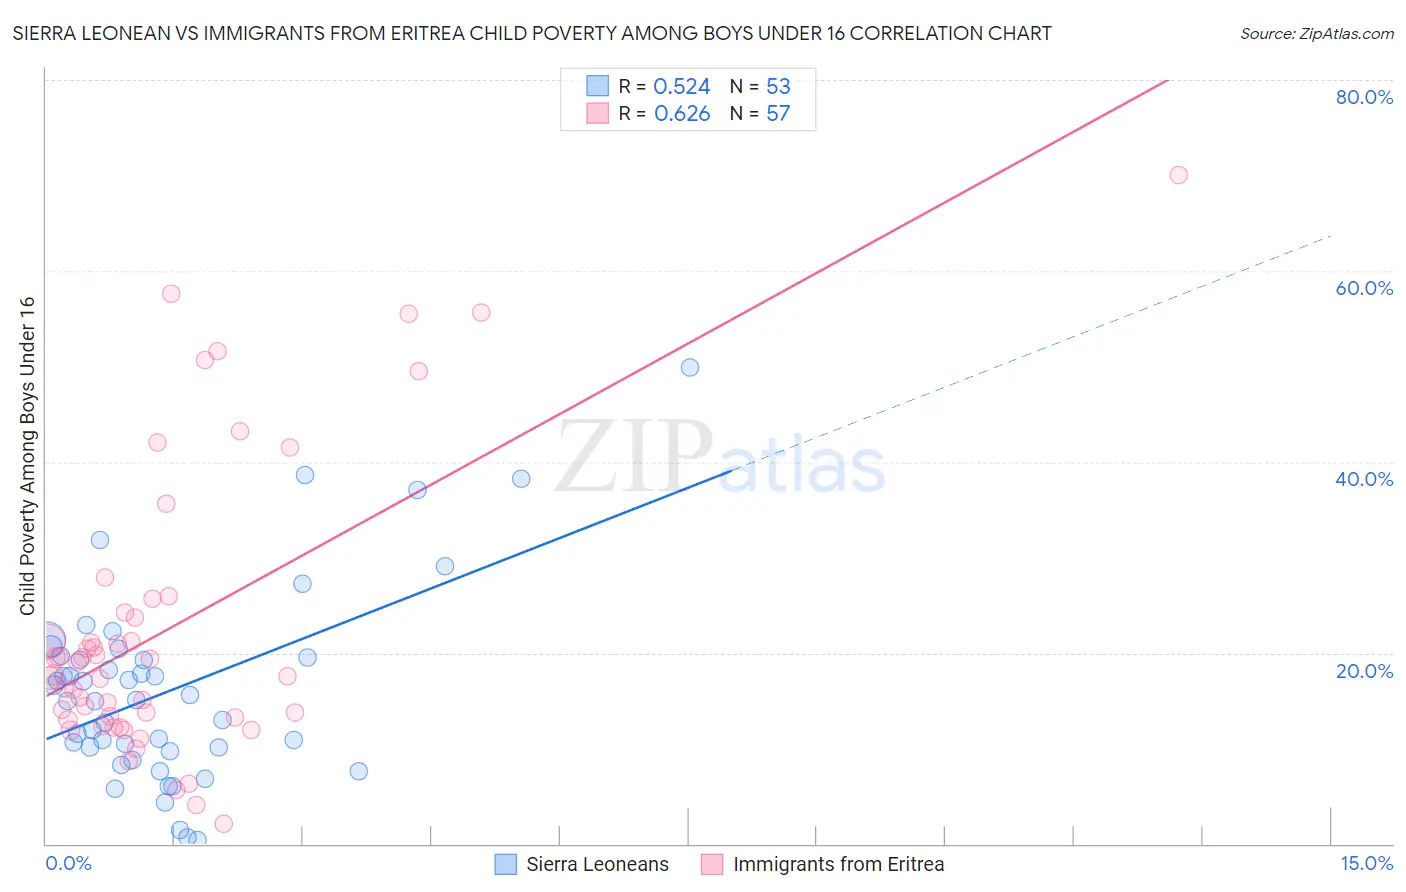 Sierra Leonean vs Immigrants from Eritrea Child Poverty Among Boys Under 16